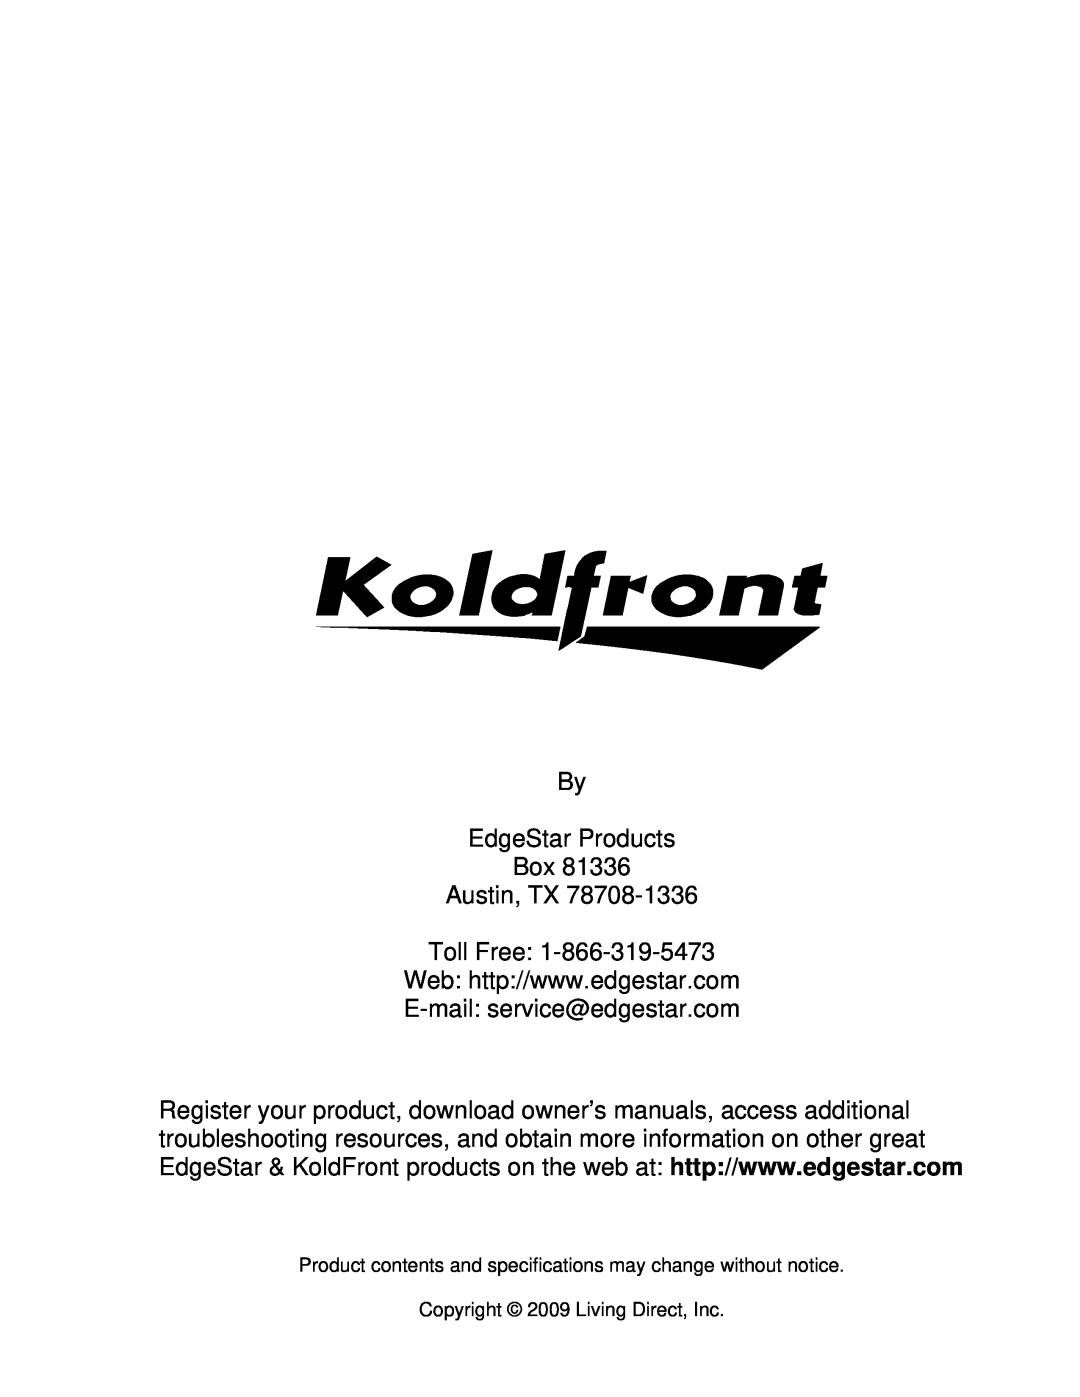 KoldFront PAC8000S owner manual By EdgeStar Products Box Austin, TX Toll Free, Copyright 2009 Living Direct, Inc 